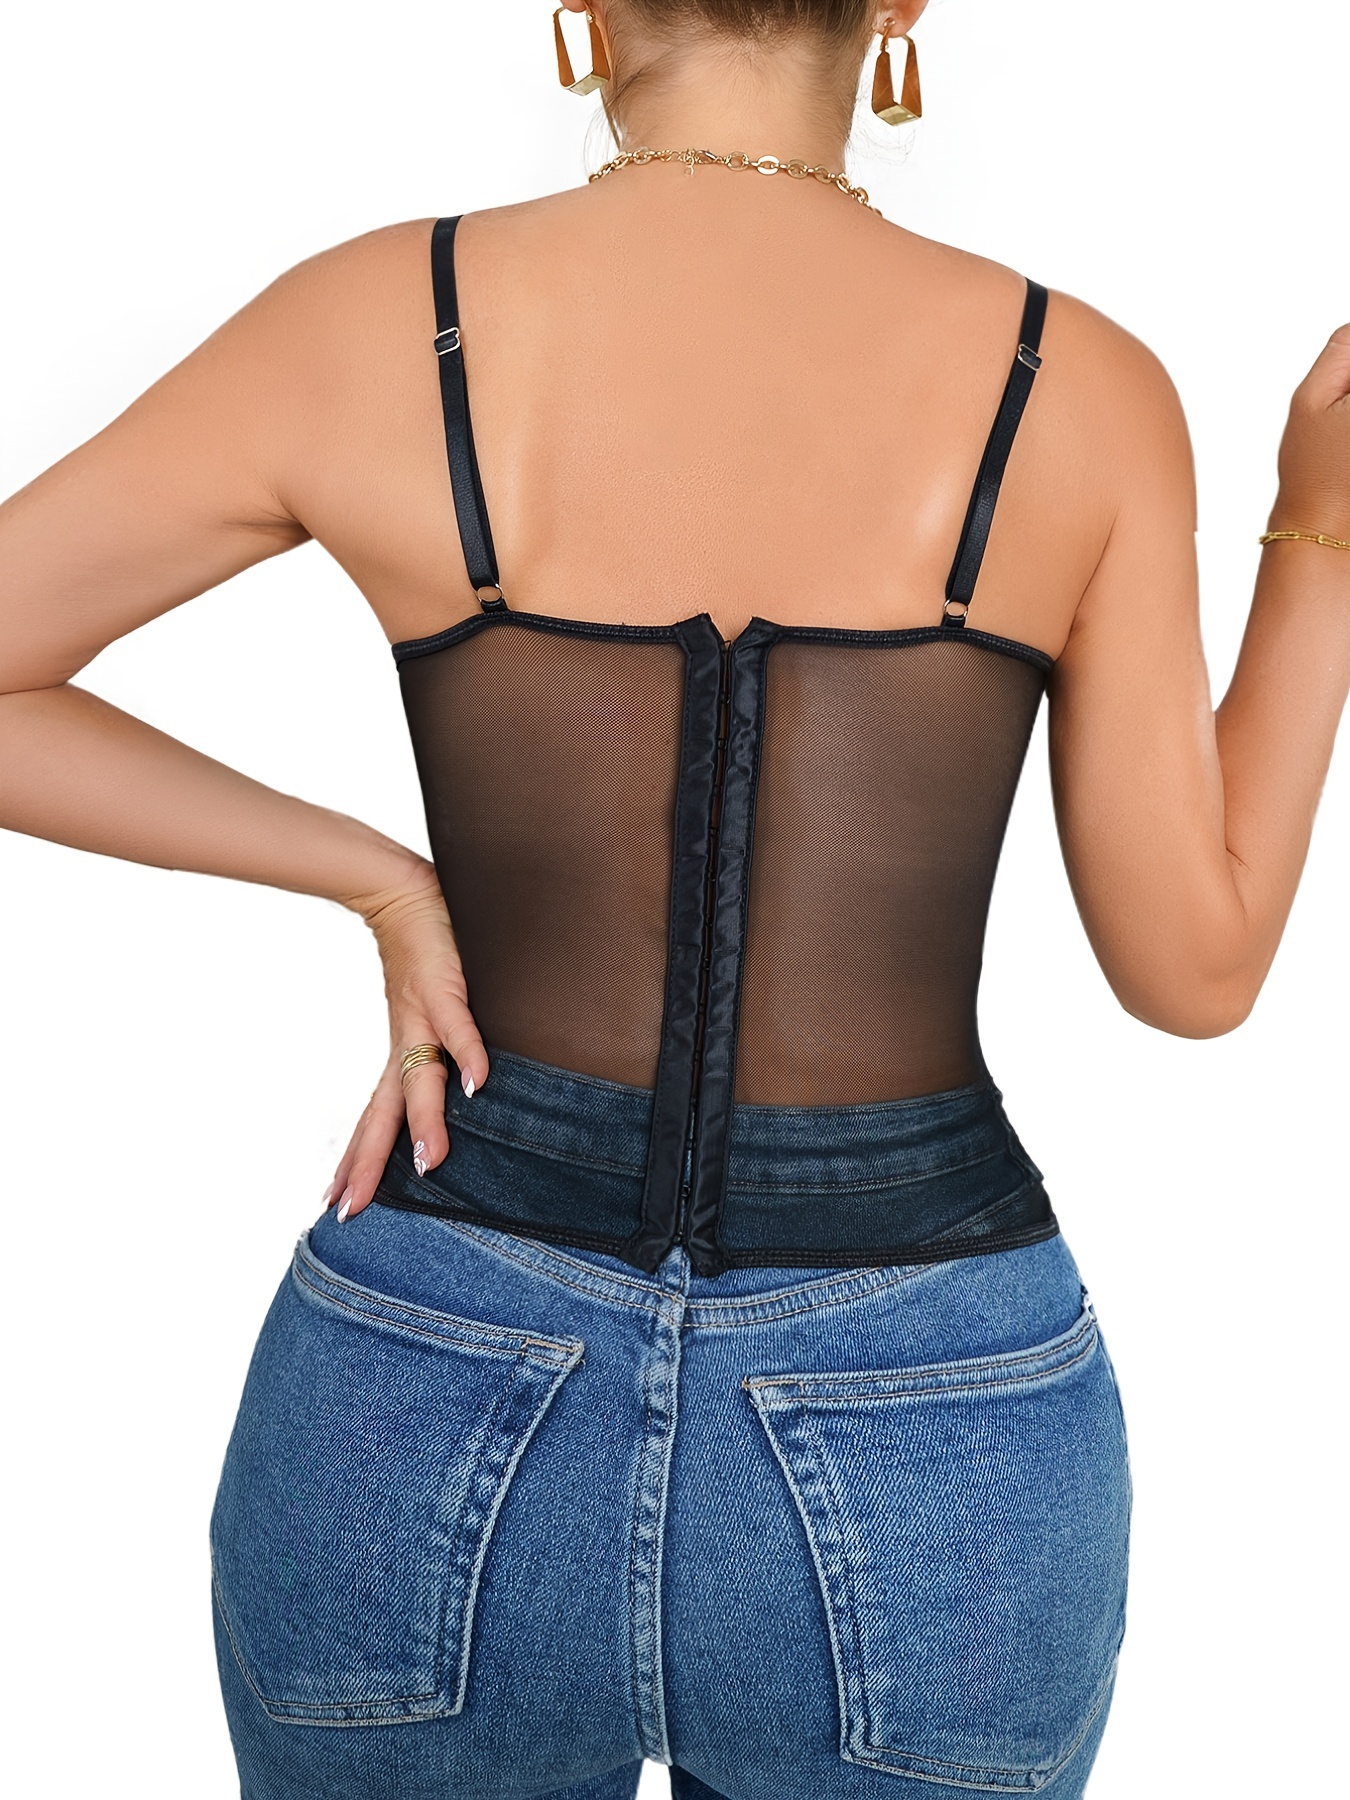 Sexy Lace Corset Short Corset Top For Women